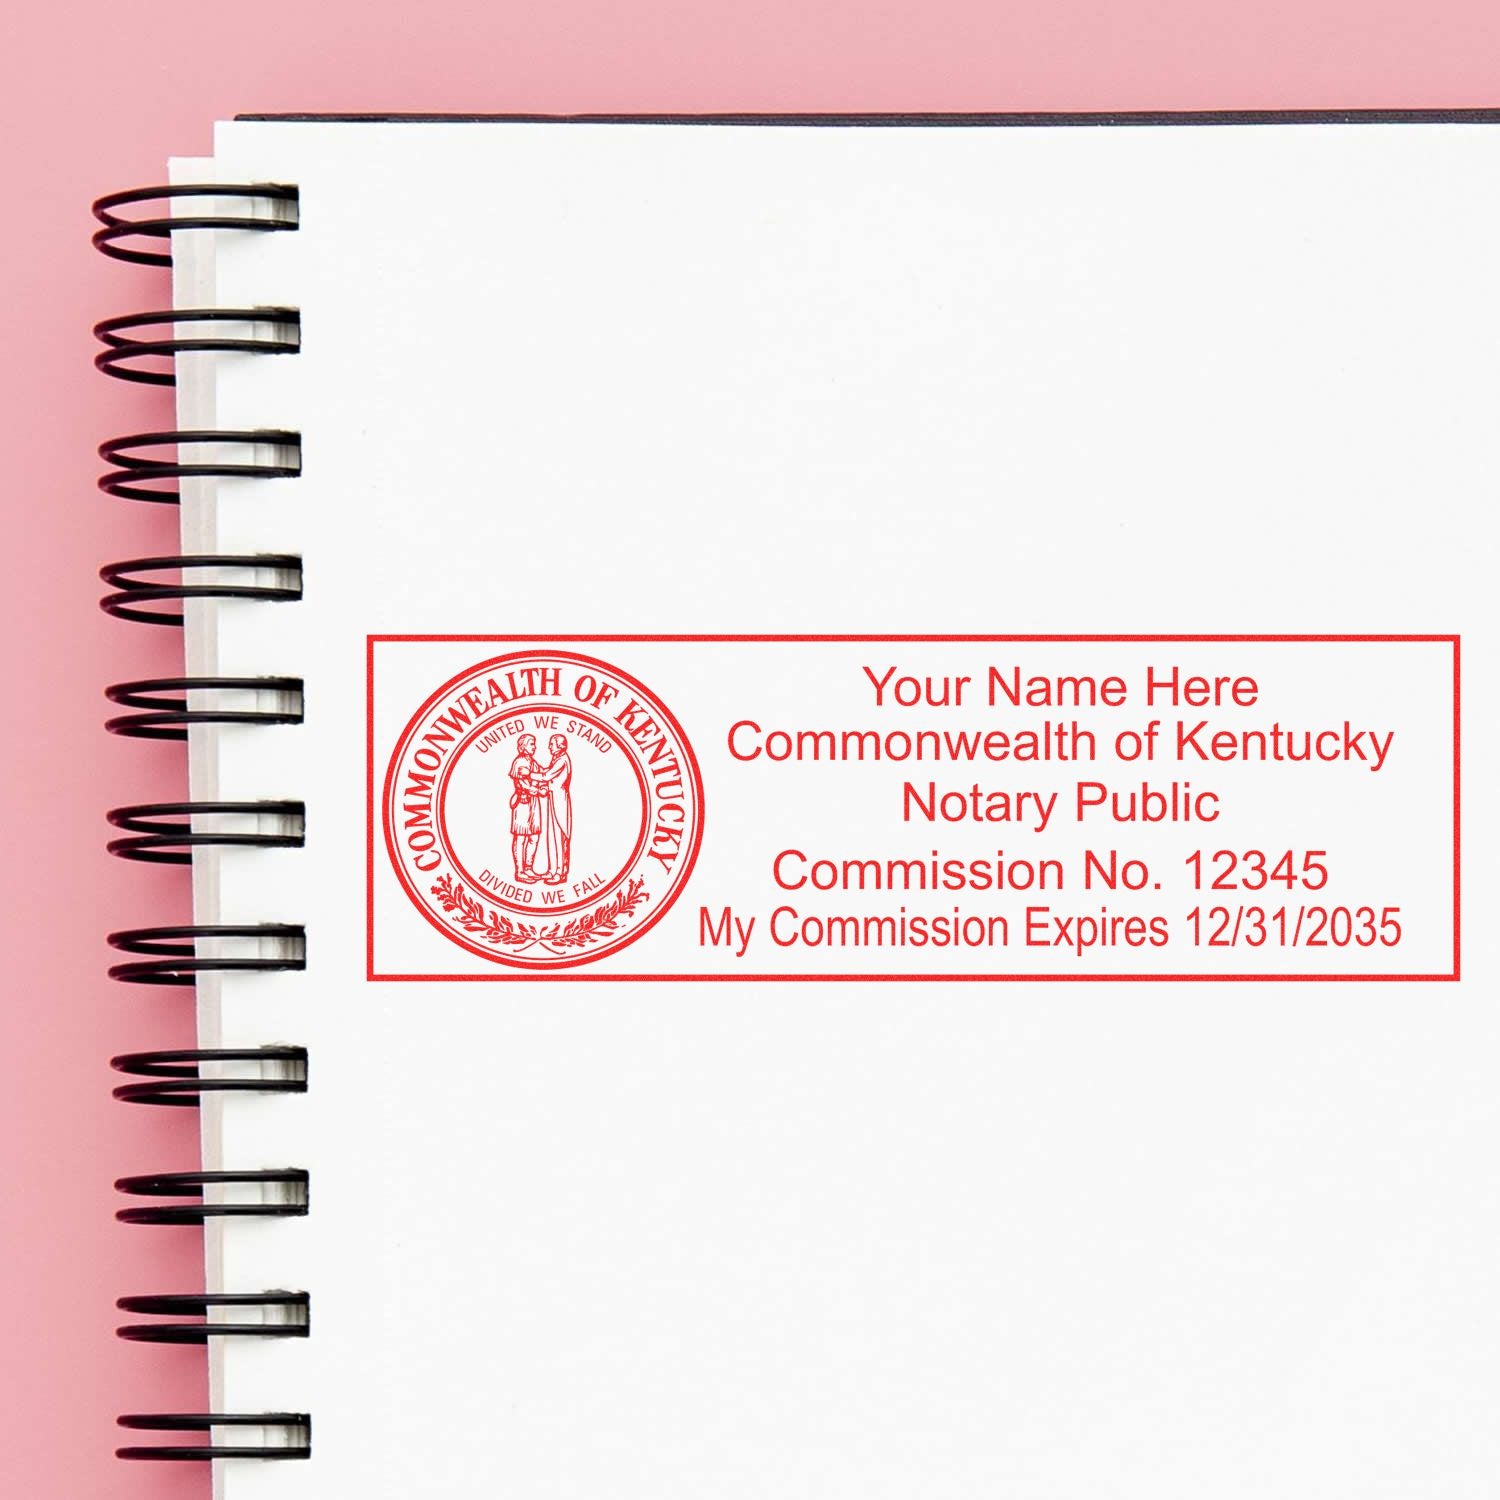 The main image for the PSI Kentucky Notary Stamp depicting a sample of the imprint and electronic files